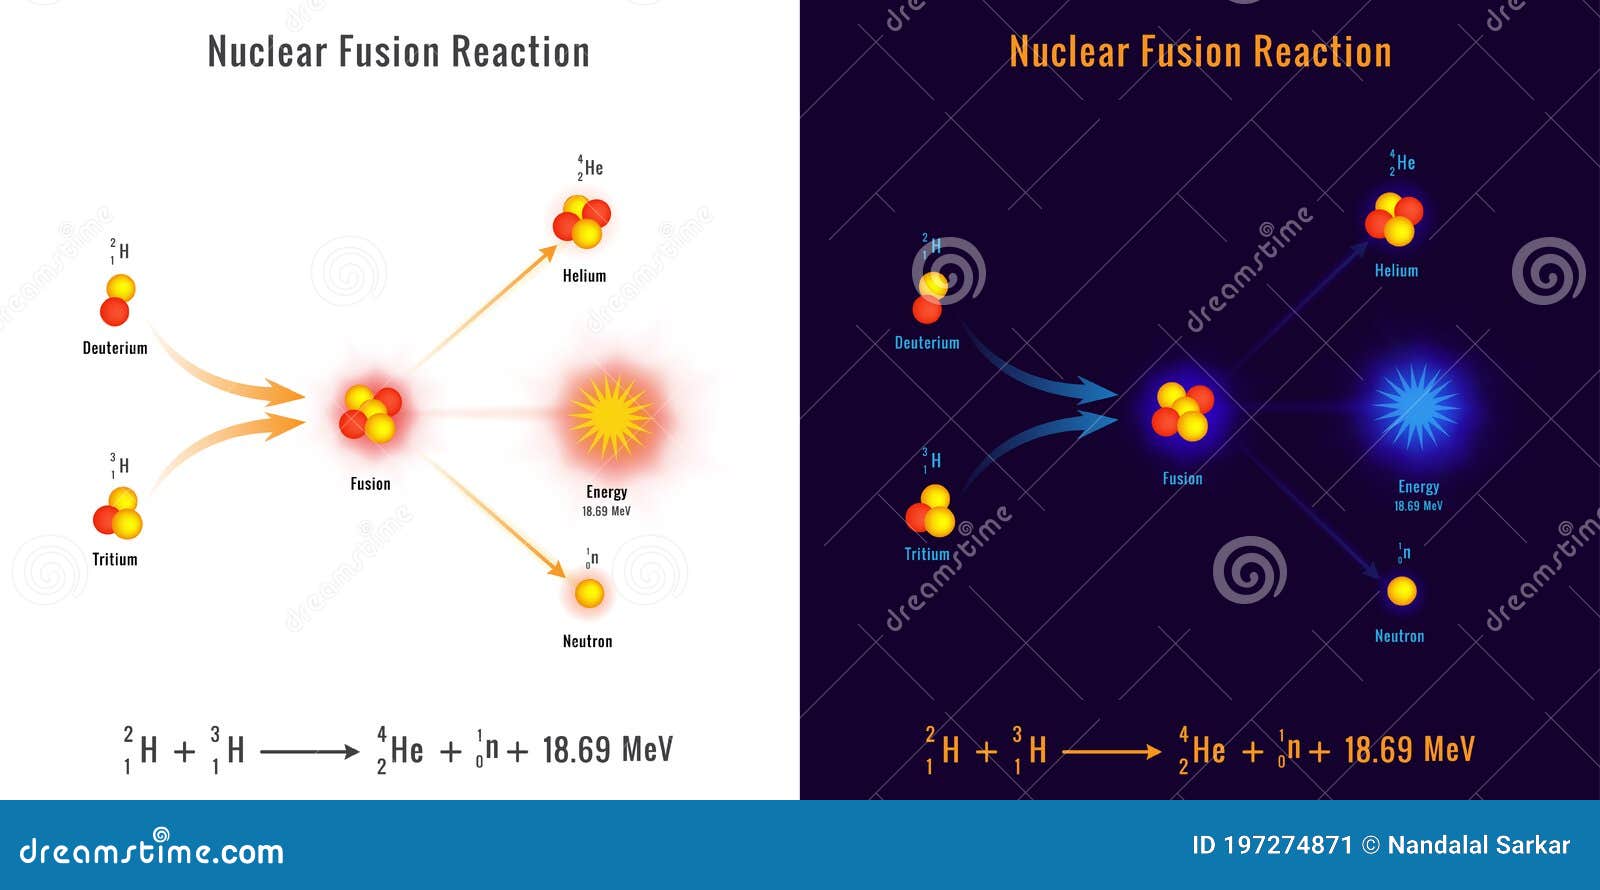 nuclear fusion reaction process  image